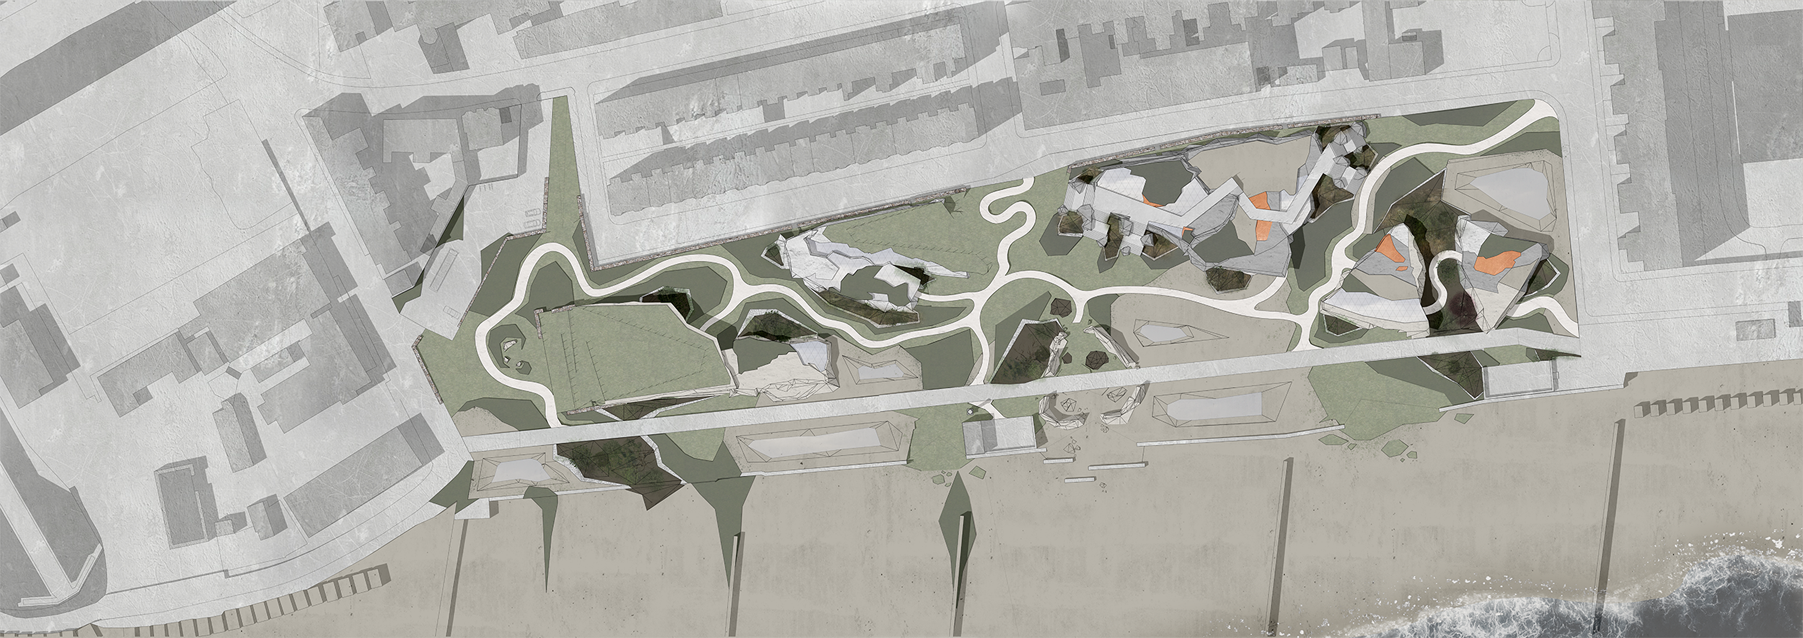 Masterplan for a proposed earth-study oriented research park, Hastings, East Sussex.